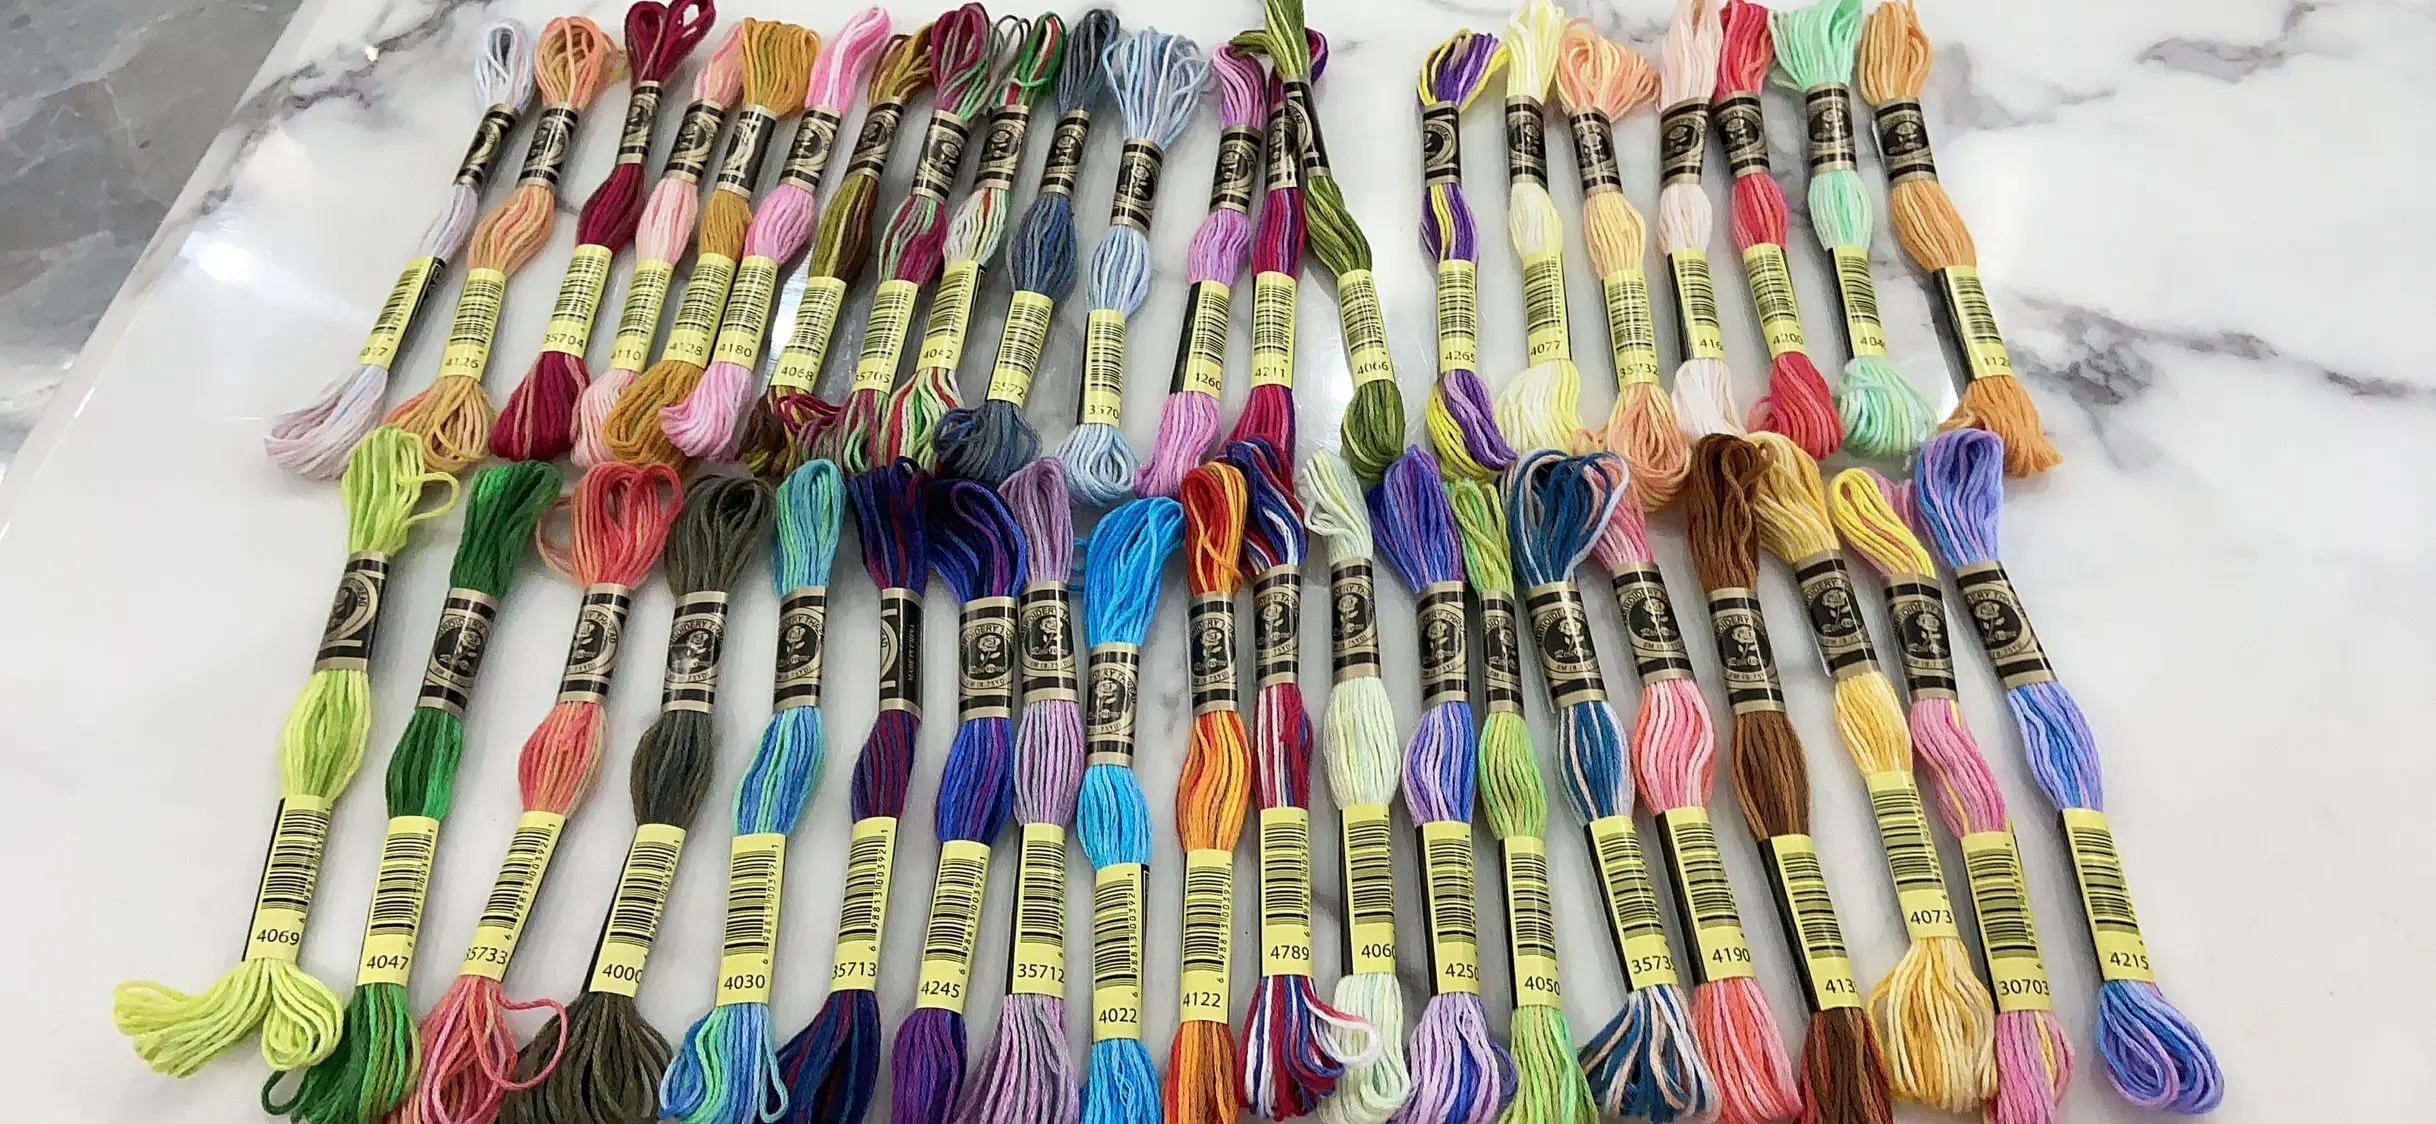 

41 Variegated Colors Double Mercerized 100% Egyptian Cotton Embroidery Floss 8 meters per skein Variation Cross stitch rose